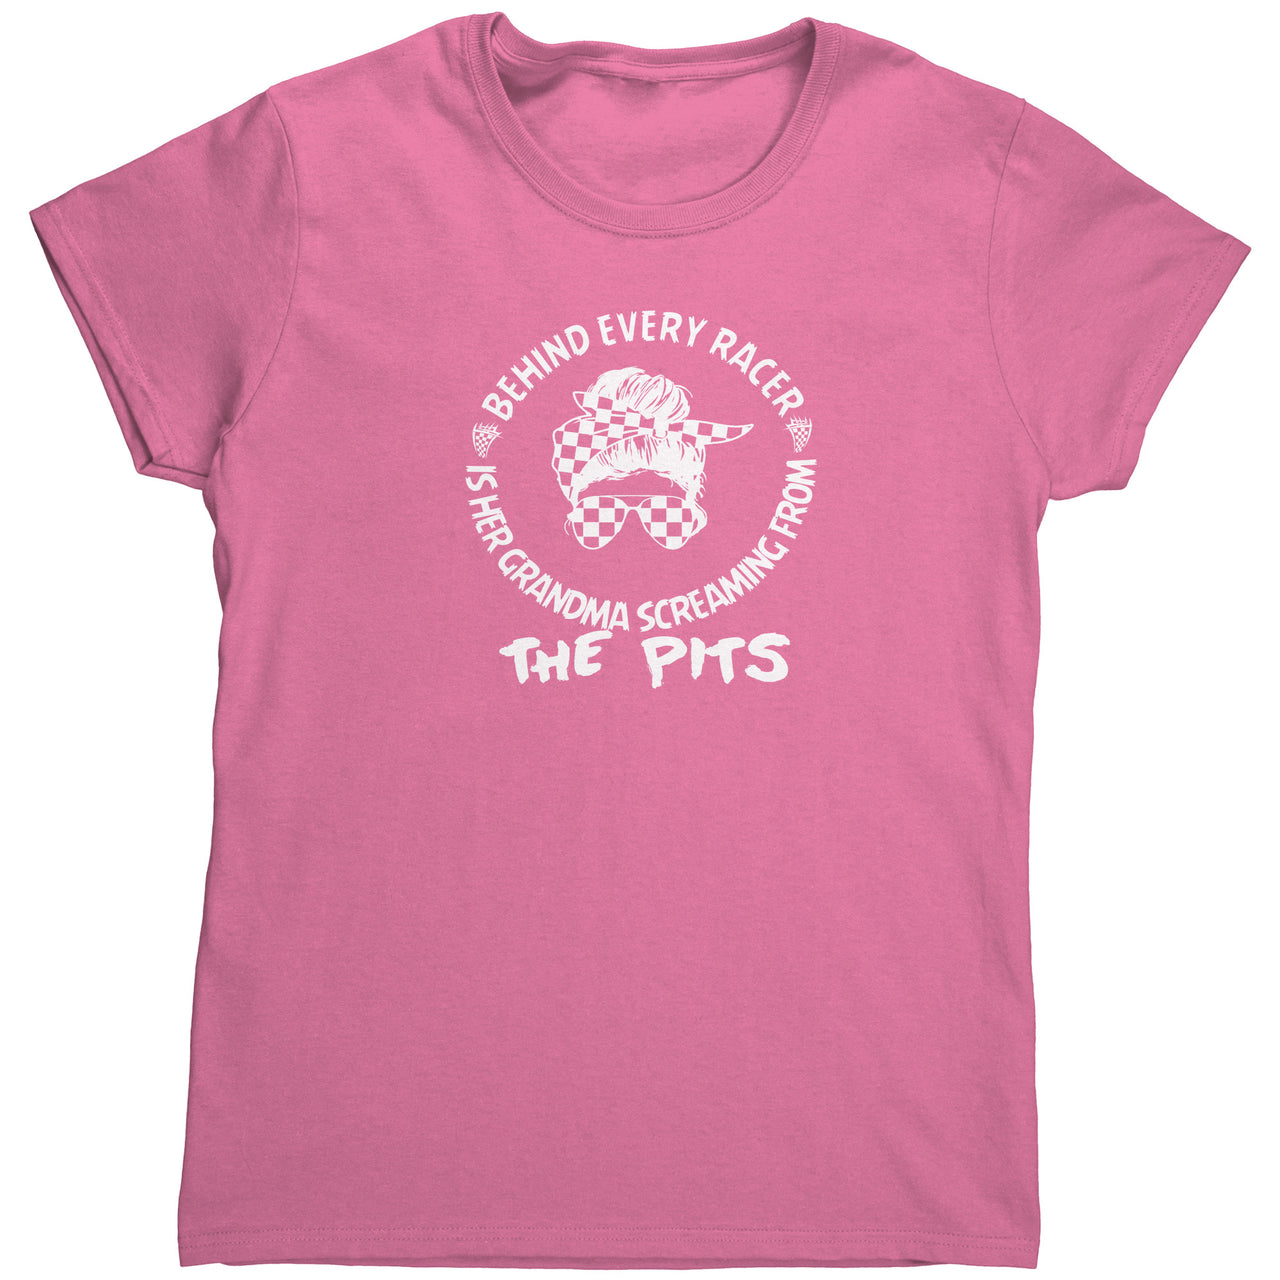 Behind Every Racer Is Her Grandma Screaming From The Pits Tees